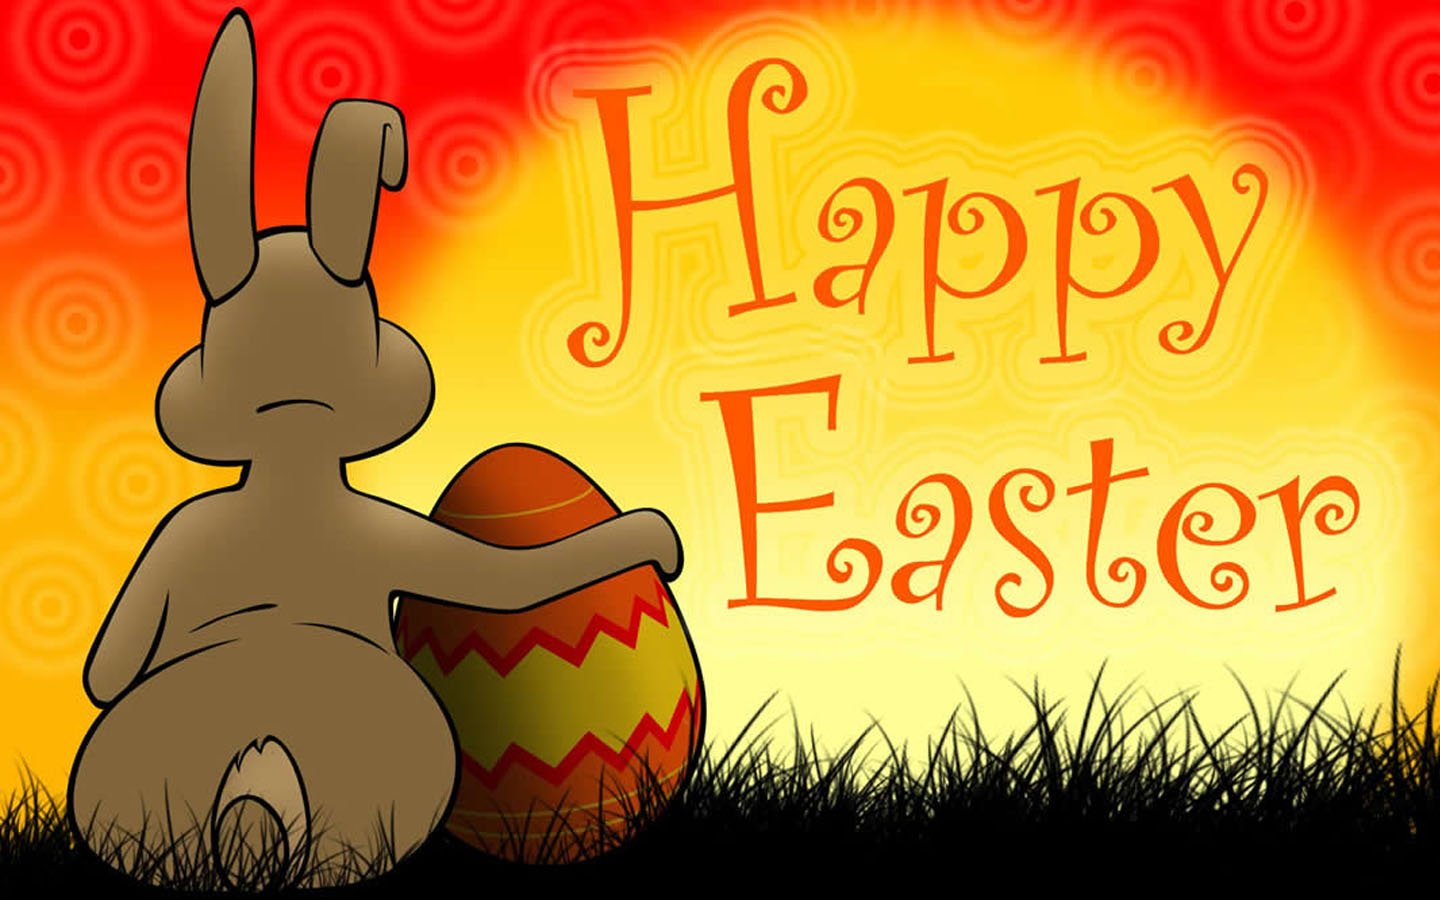 Happy Easter Image Pictures Pics Photos Wallpaper In HD